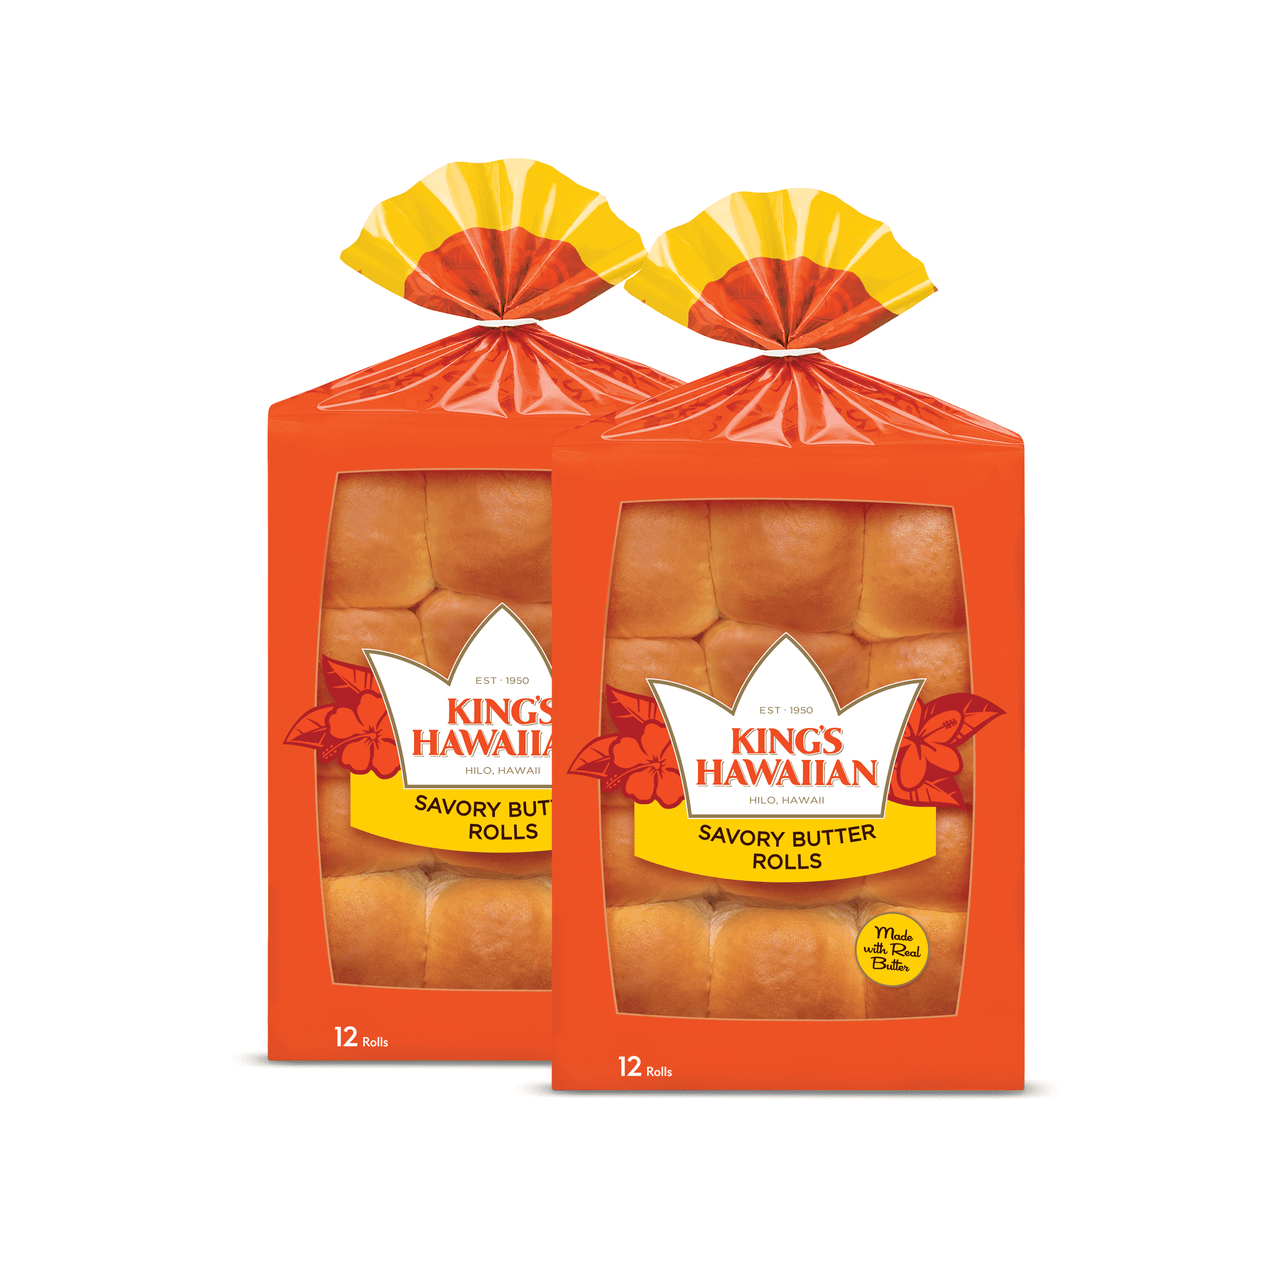 Two packs of King's Hawaiian Savory Butter Rolls 12ct